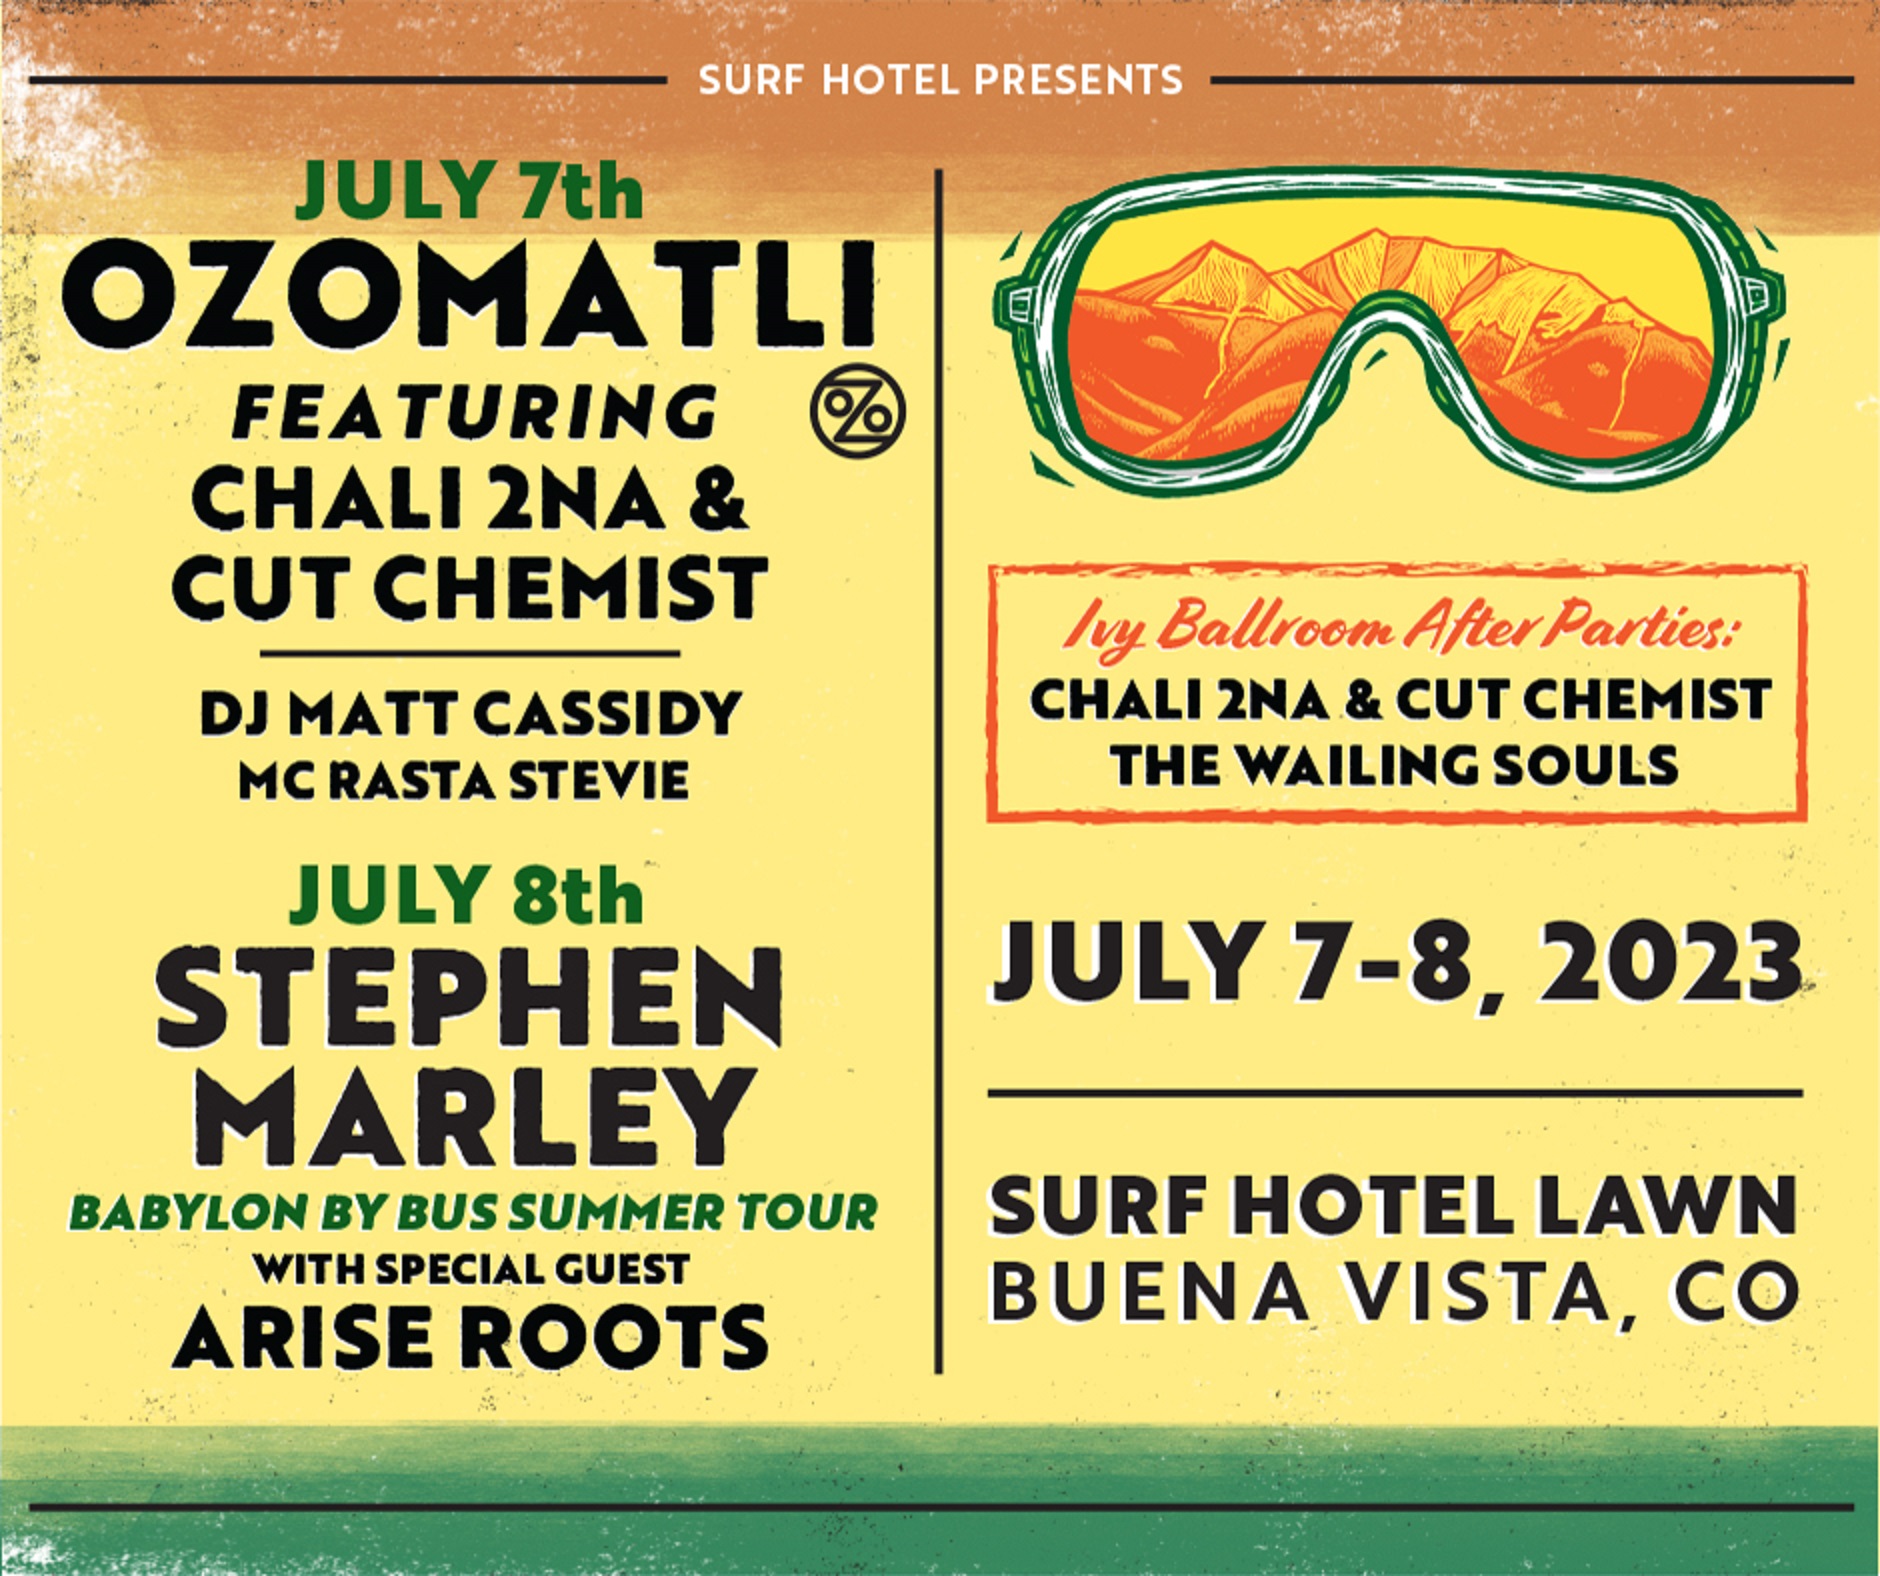 Ozomatli & Stephen Marley on The LAWN at Surf Hotel